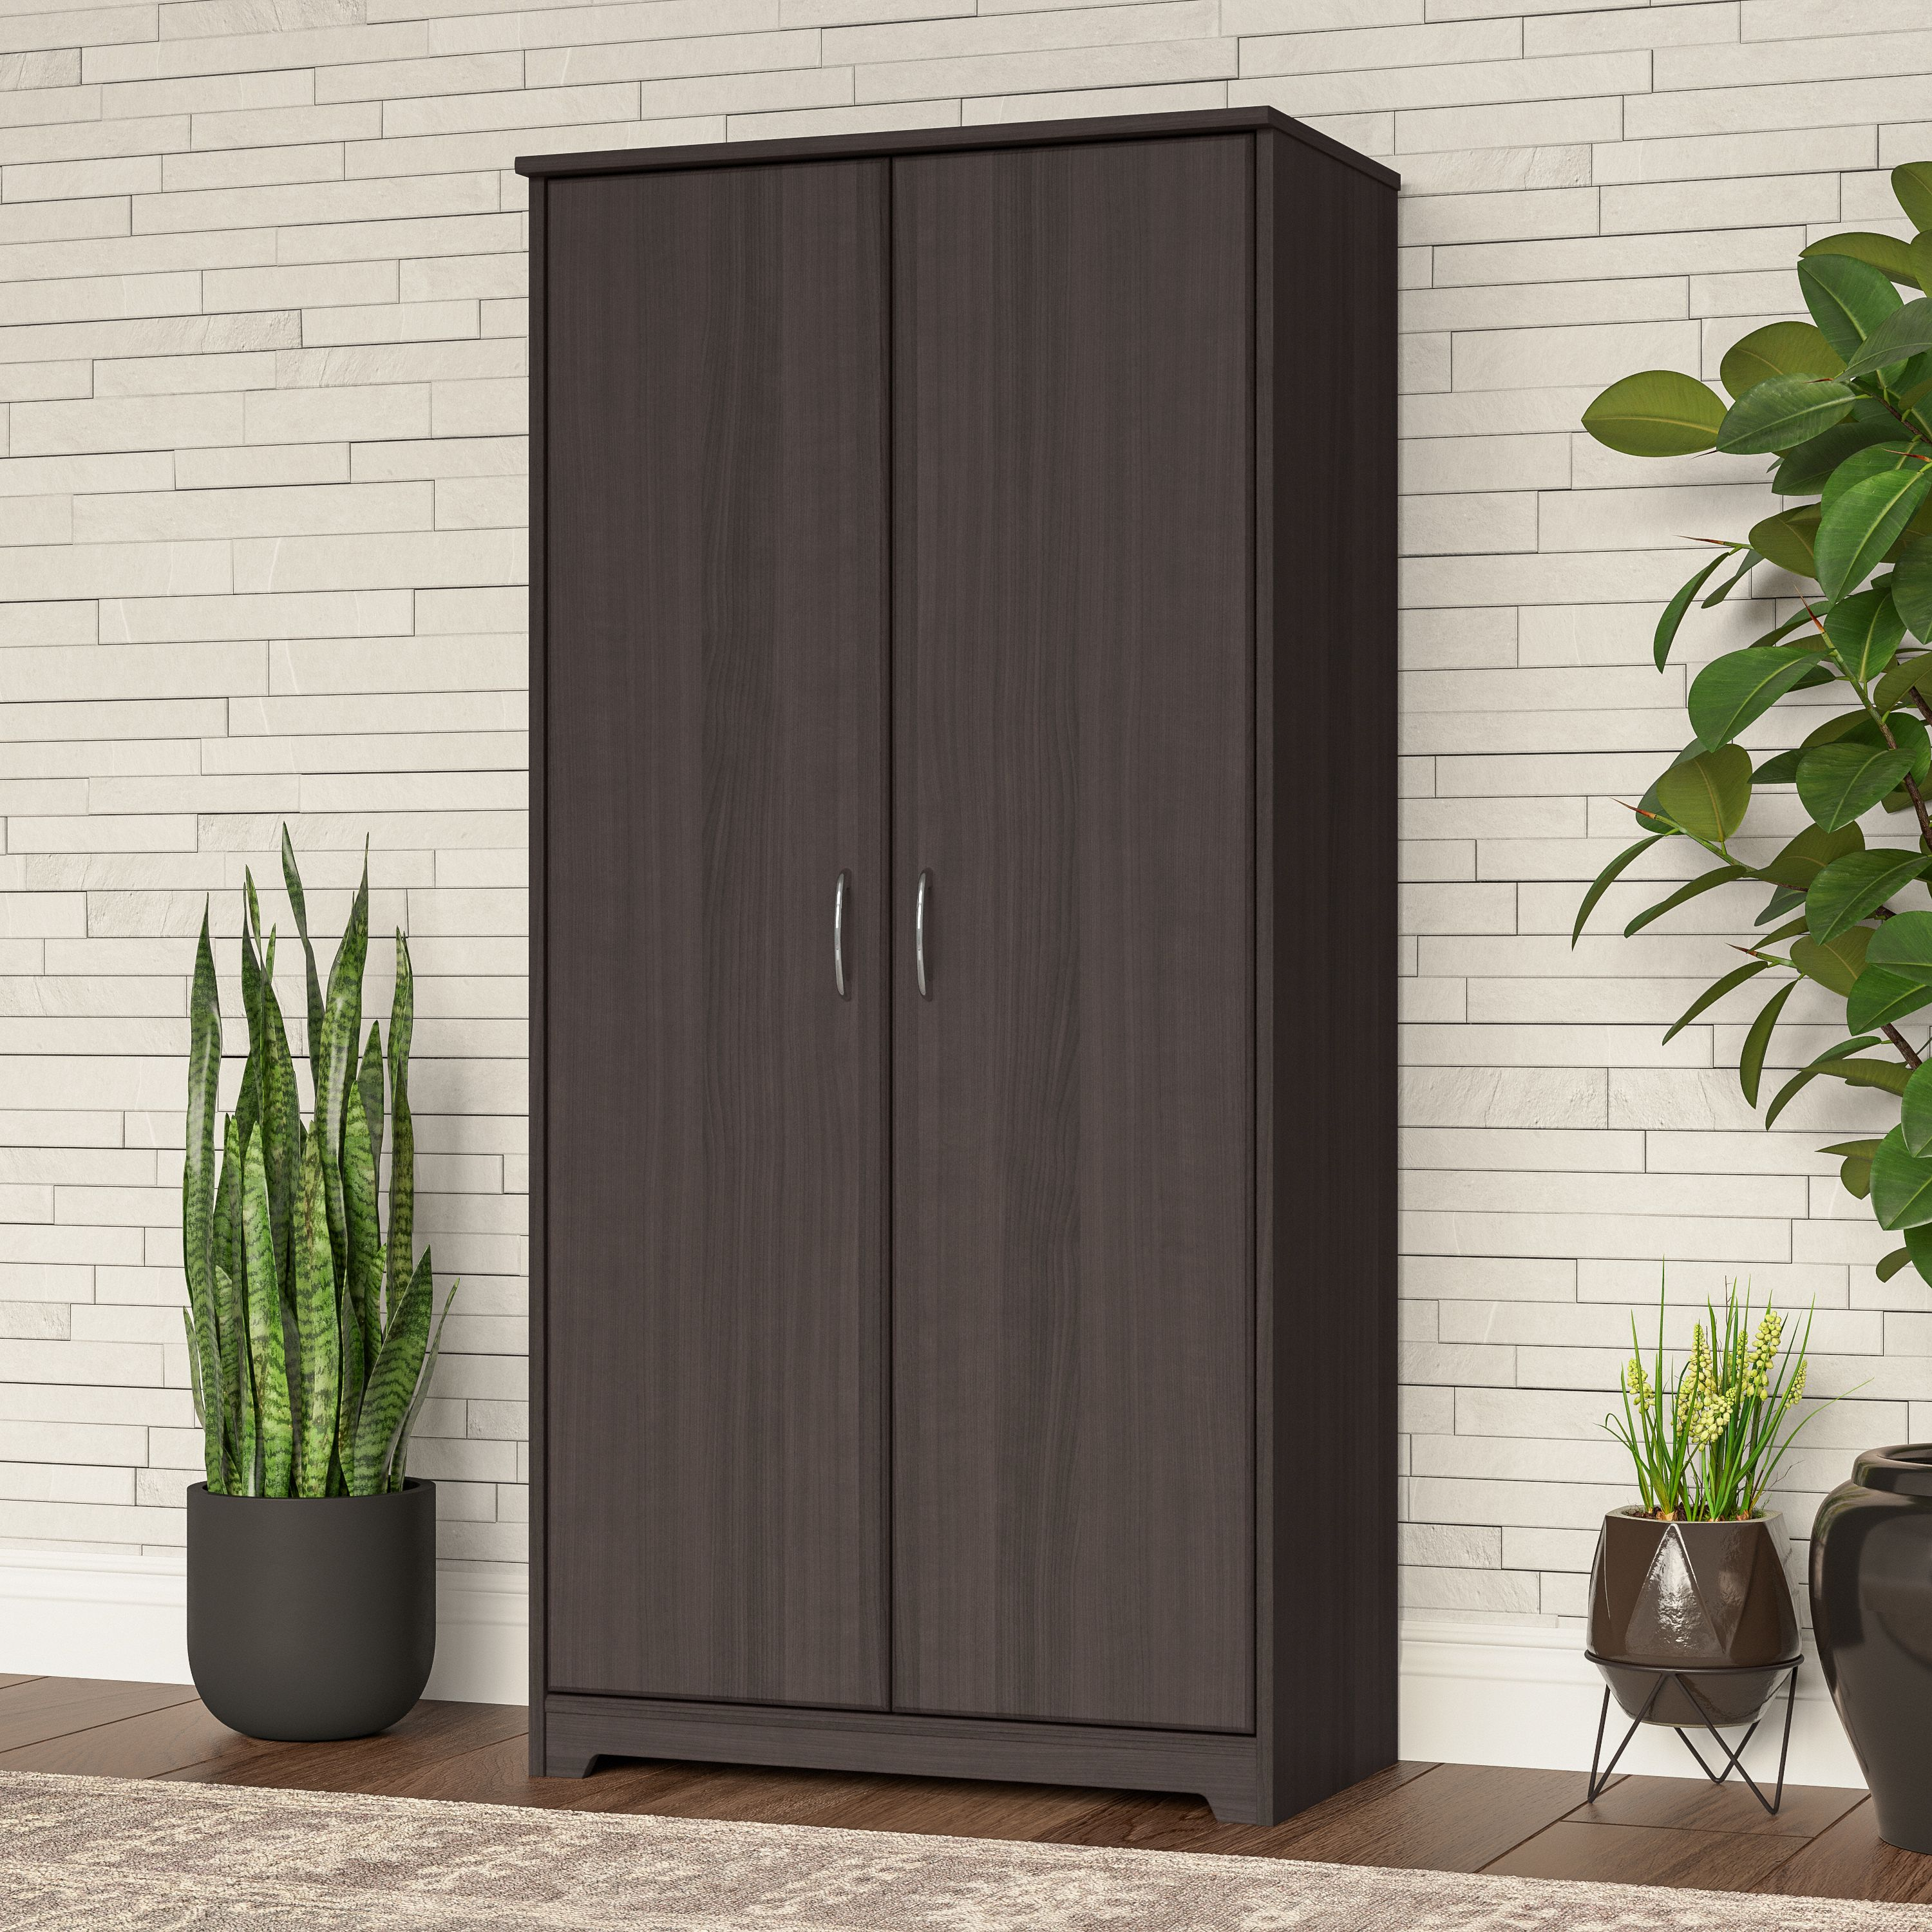 Shop Bush Furniture Cabot Tall Storage Cabinet with Doors 01 WC31799 #color_heather gray